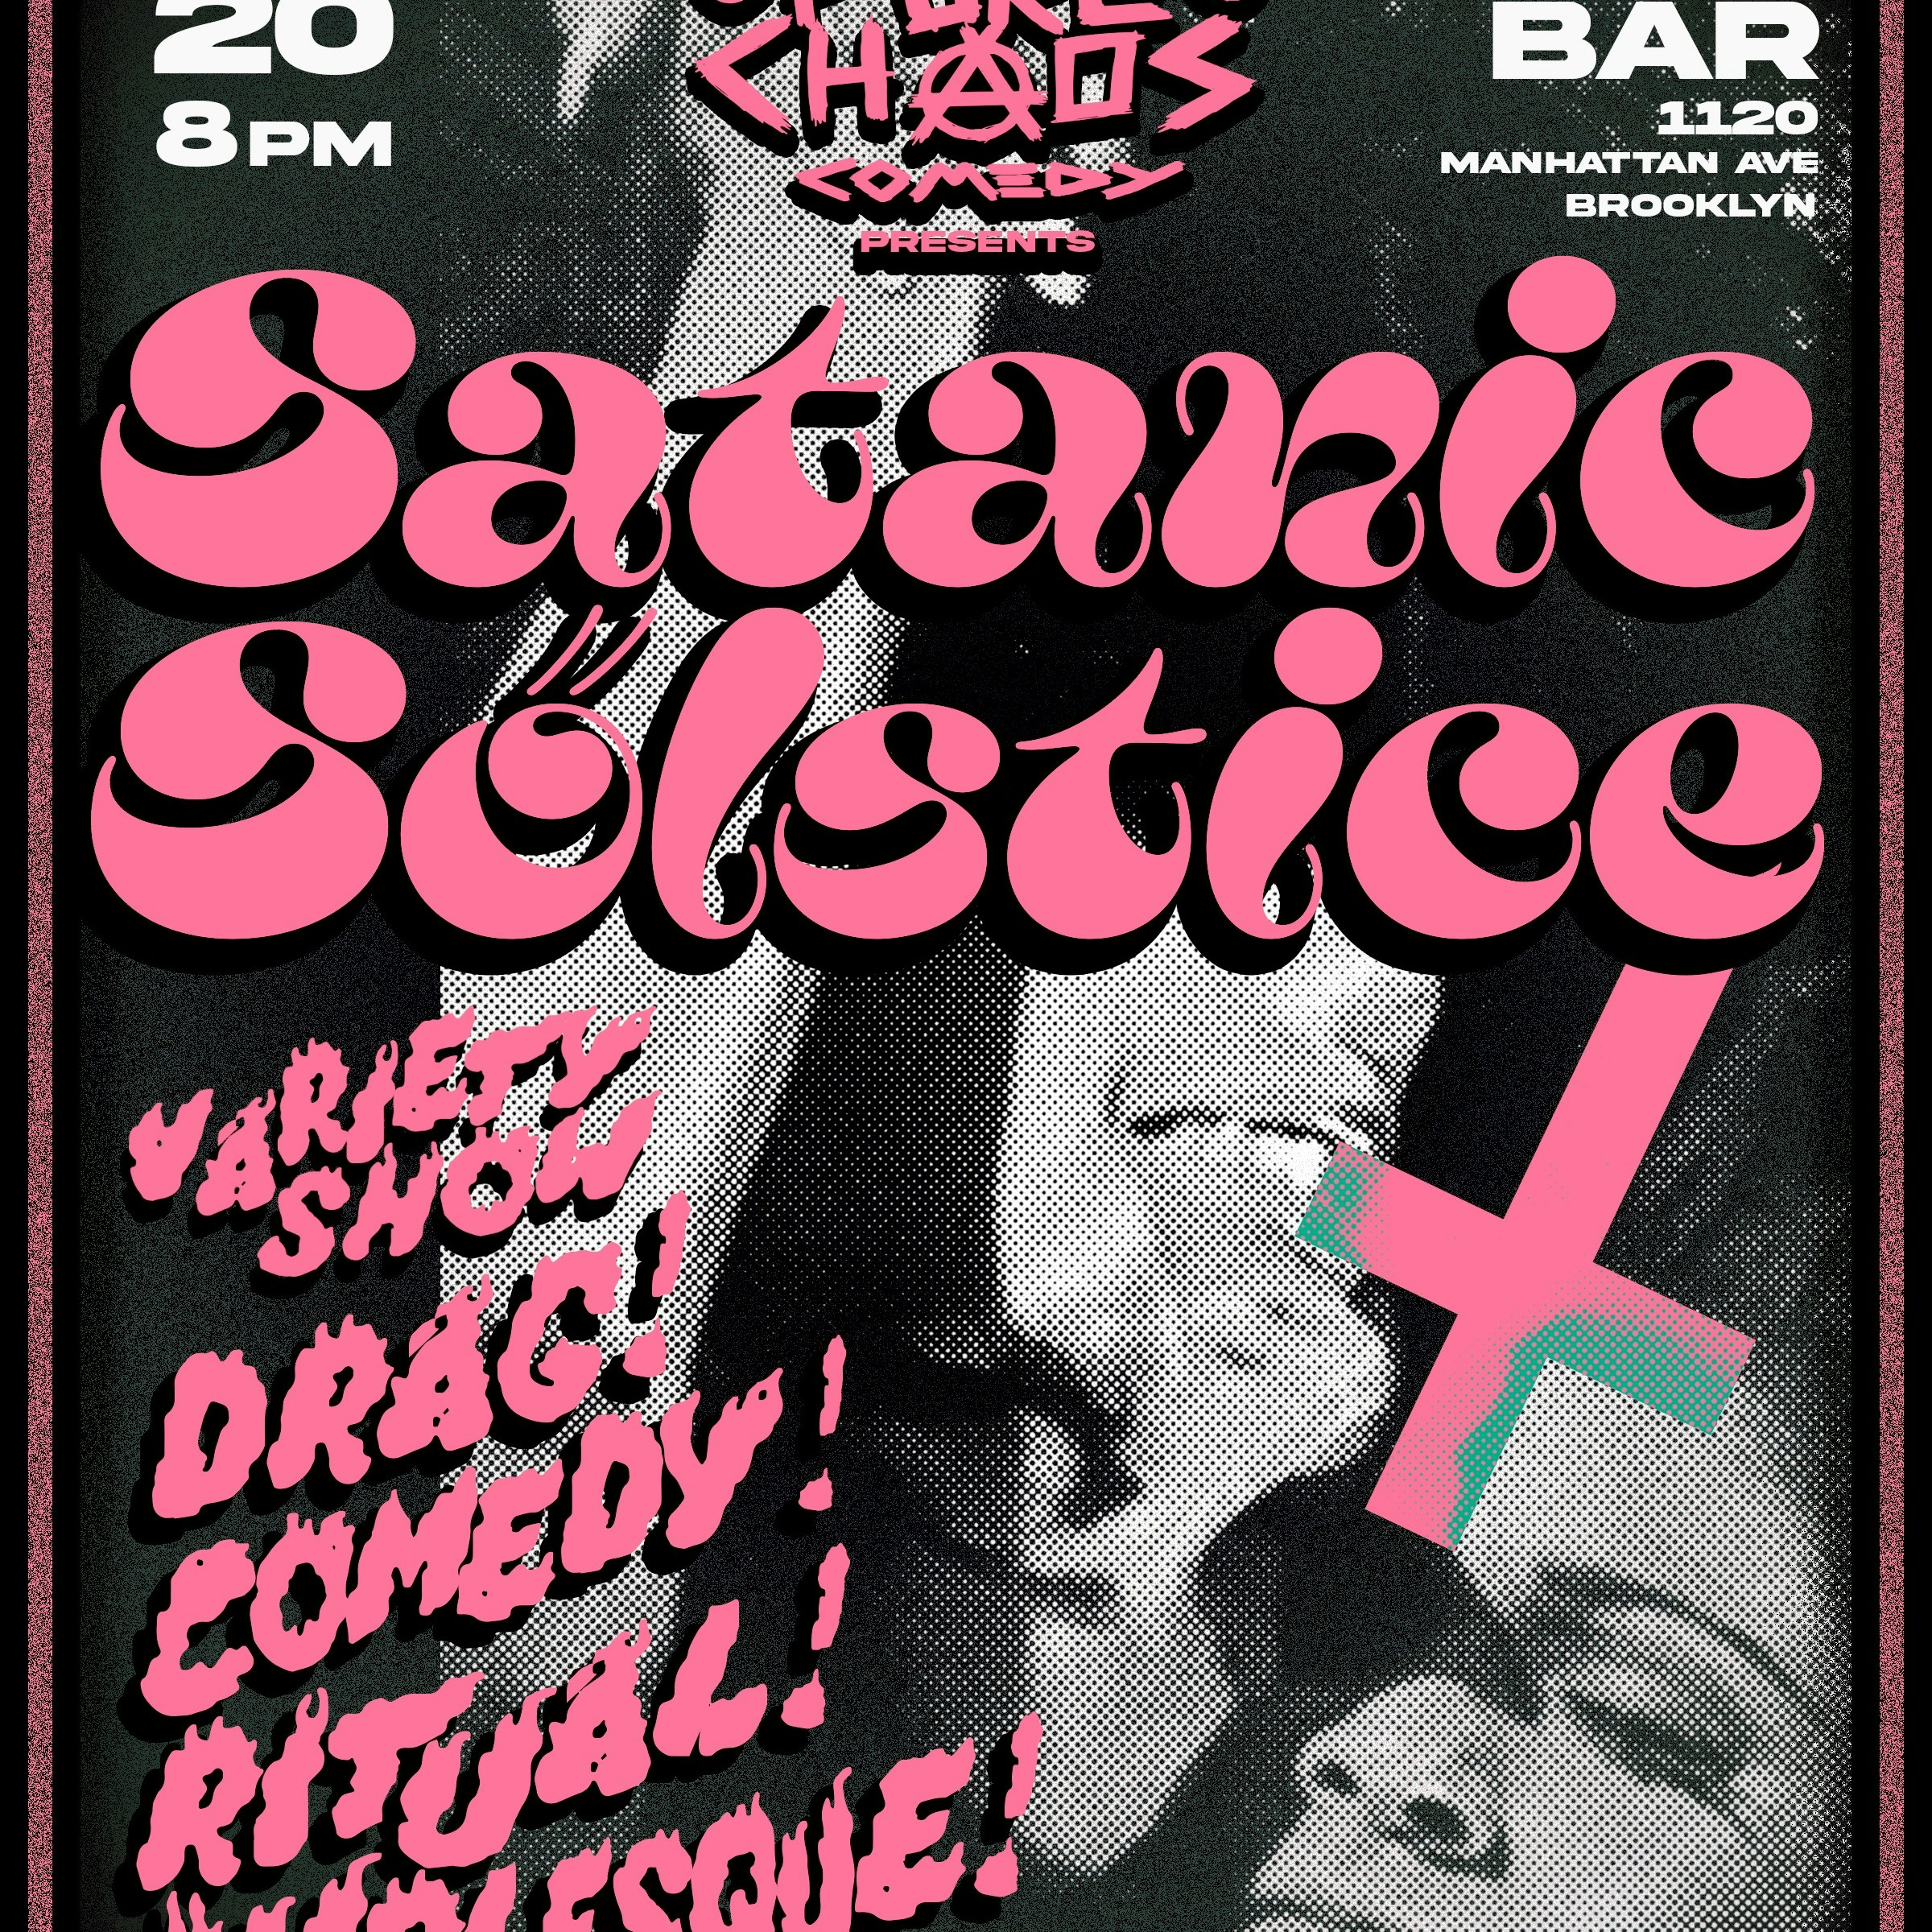 Pure Chaos presents: Satanic Solstice Variety Show